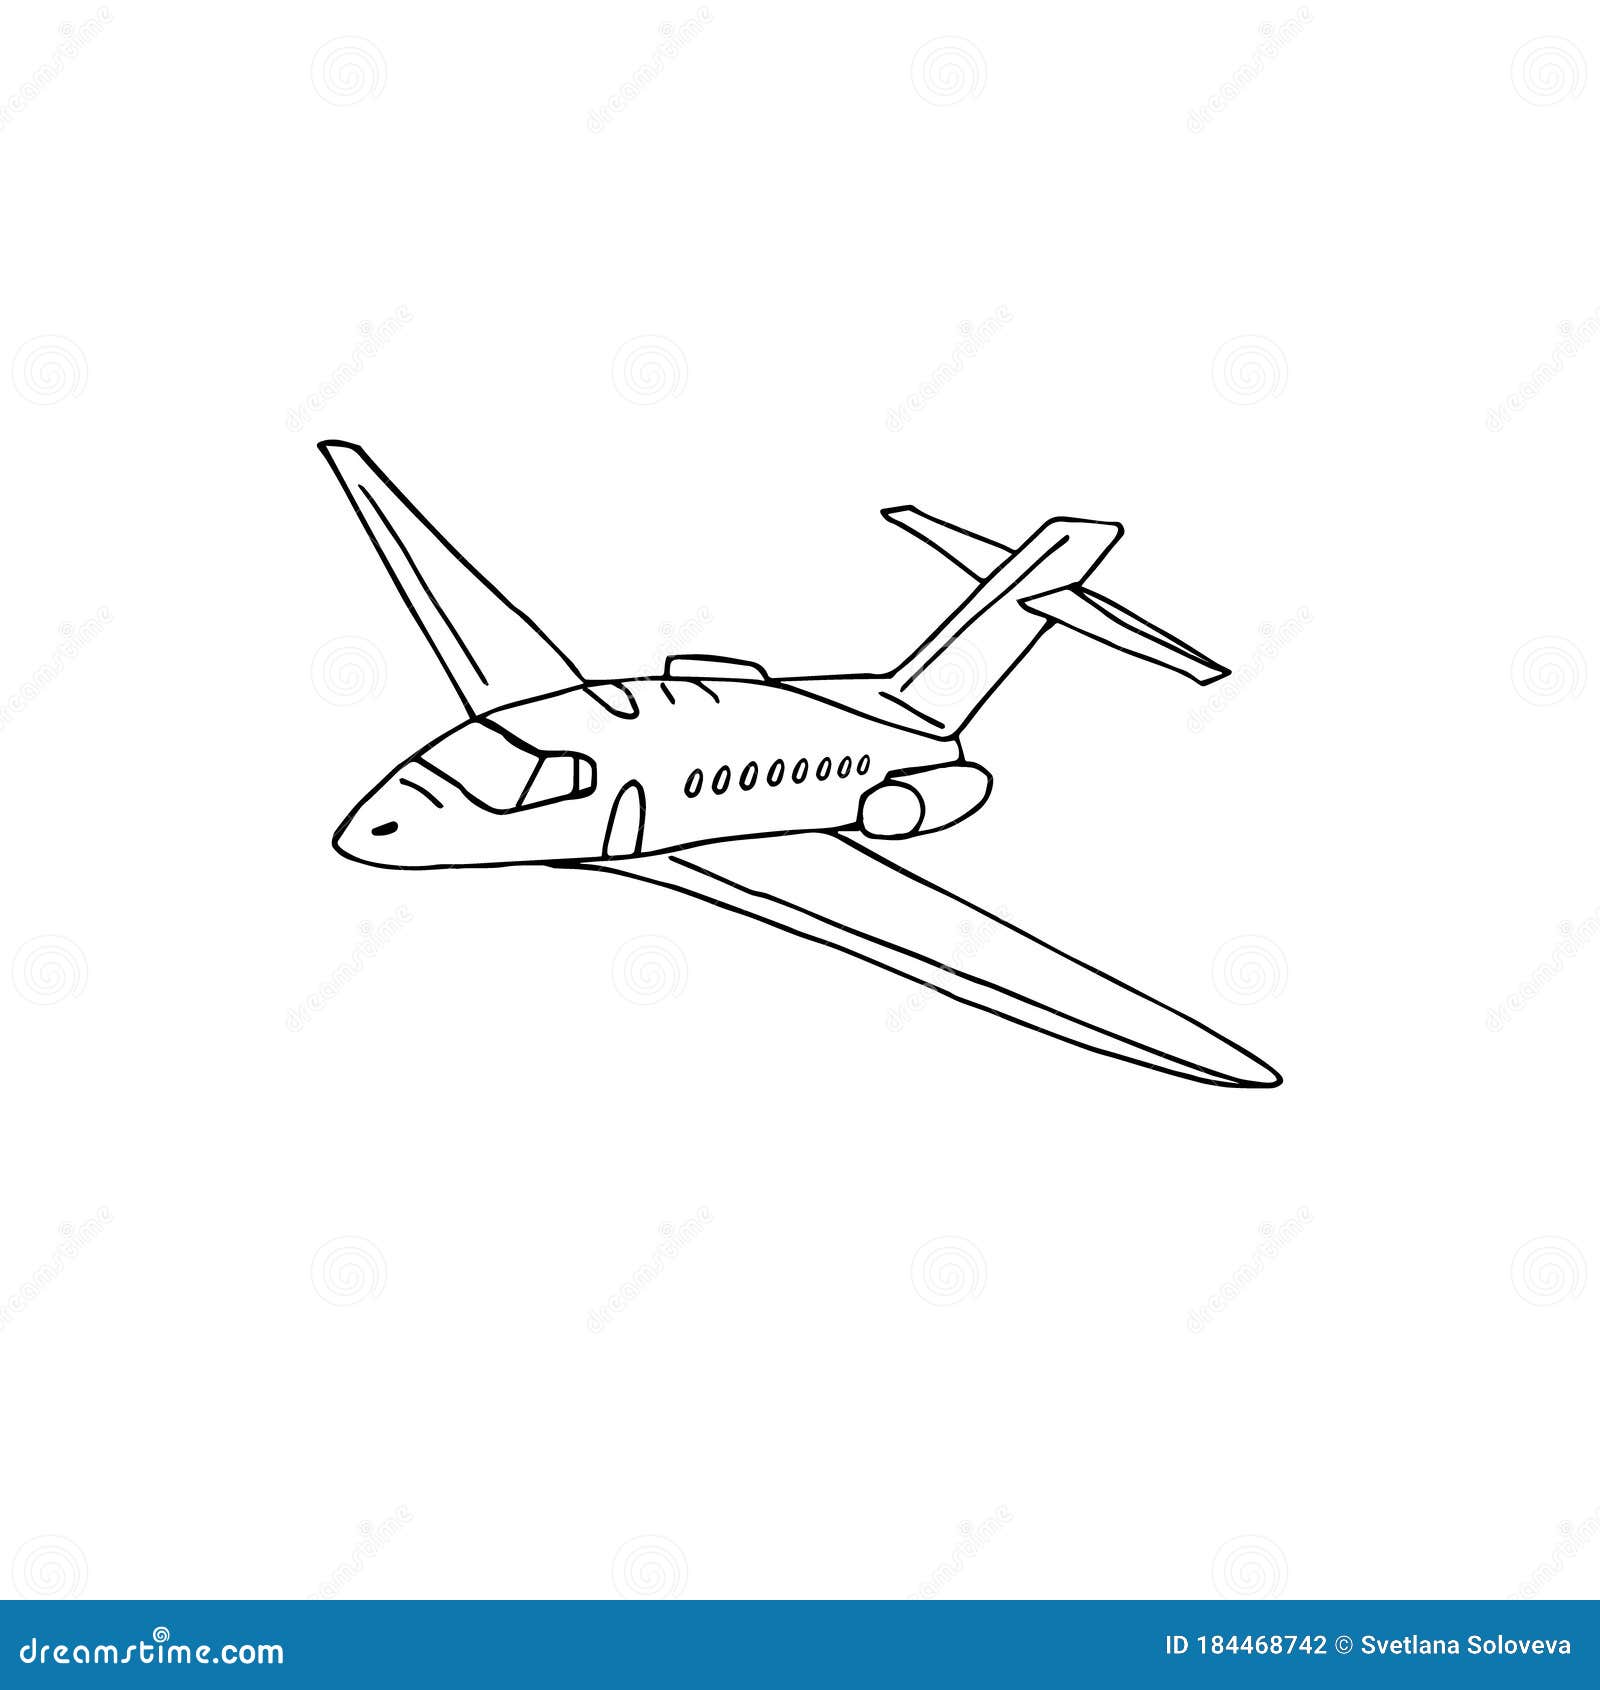 How to Draw Aeroplane Sideview (Airplanes) Step by Step |  DrawingTutorials101.com